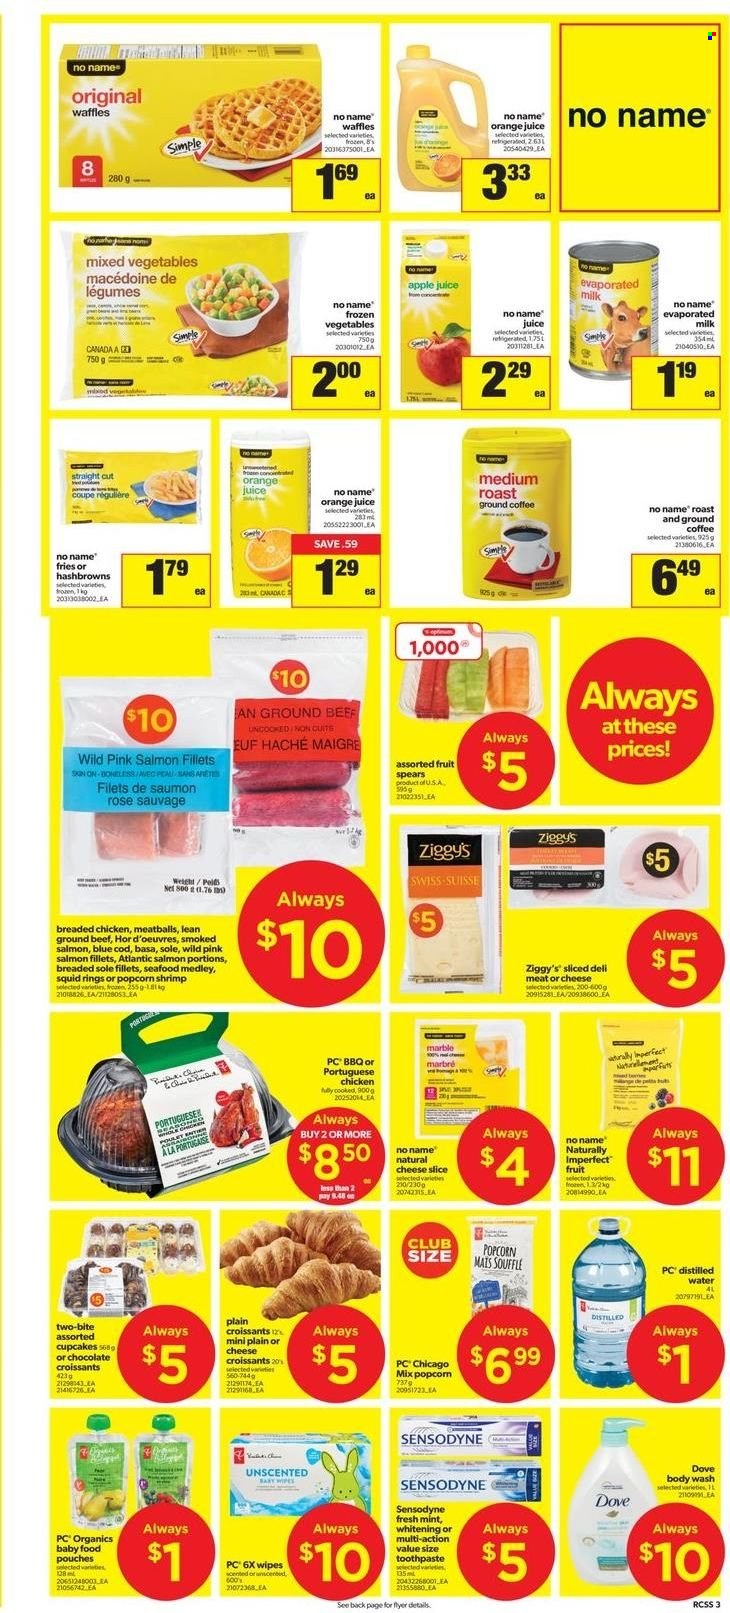 thumbnail - Real Canadian Superstore Flyer - January 06, 2022 - January 12, 2022 - Sales products - croissant, cupcake, waffles, cod, salmon, salmon fillet, smoked salmon, squid, seafood, shrimps, squid rings, No Name, meatballs, fried chicken, evaporated milk, mixed vegetables, hash browns, potato fries, chocolate, apple juice, orange juice, juice, coffee, ground coffee, wine, rosé wine, port wine, Ron Pelicano, beef meat, ground beef, wipes, body wash, toothpaste, rose, Dove, Sensodyne. Page 3.